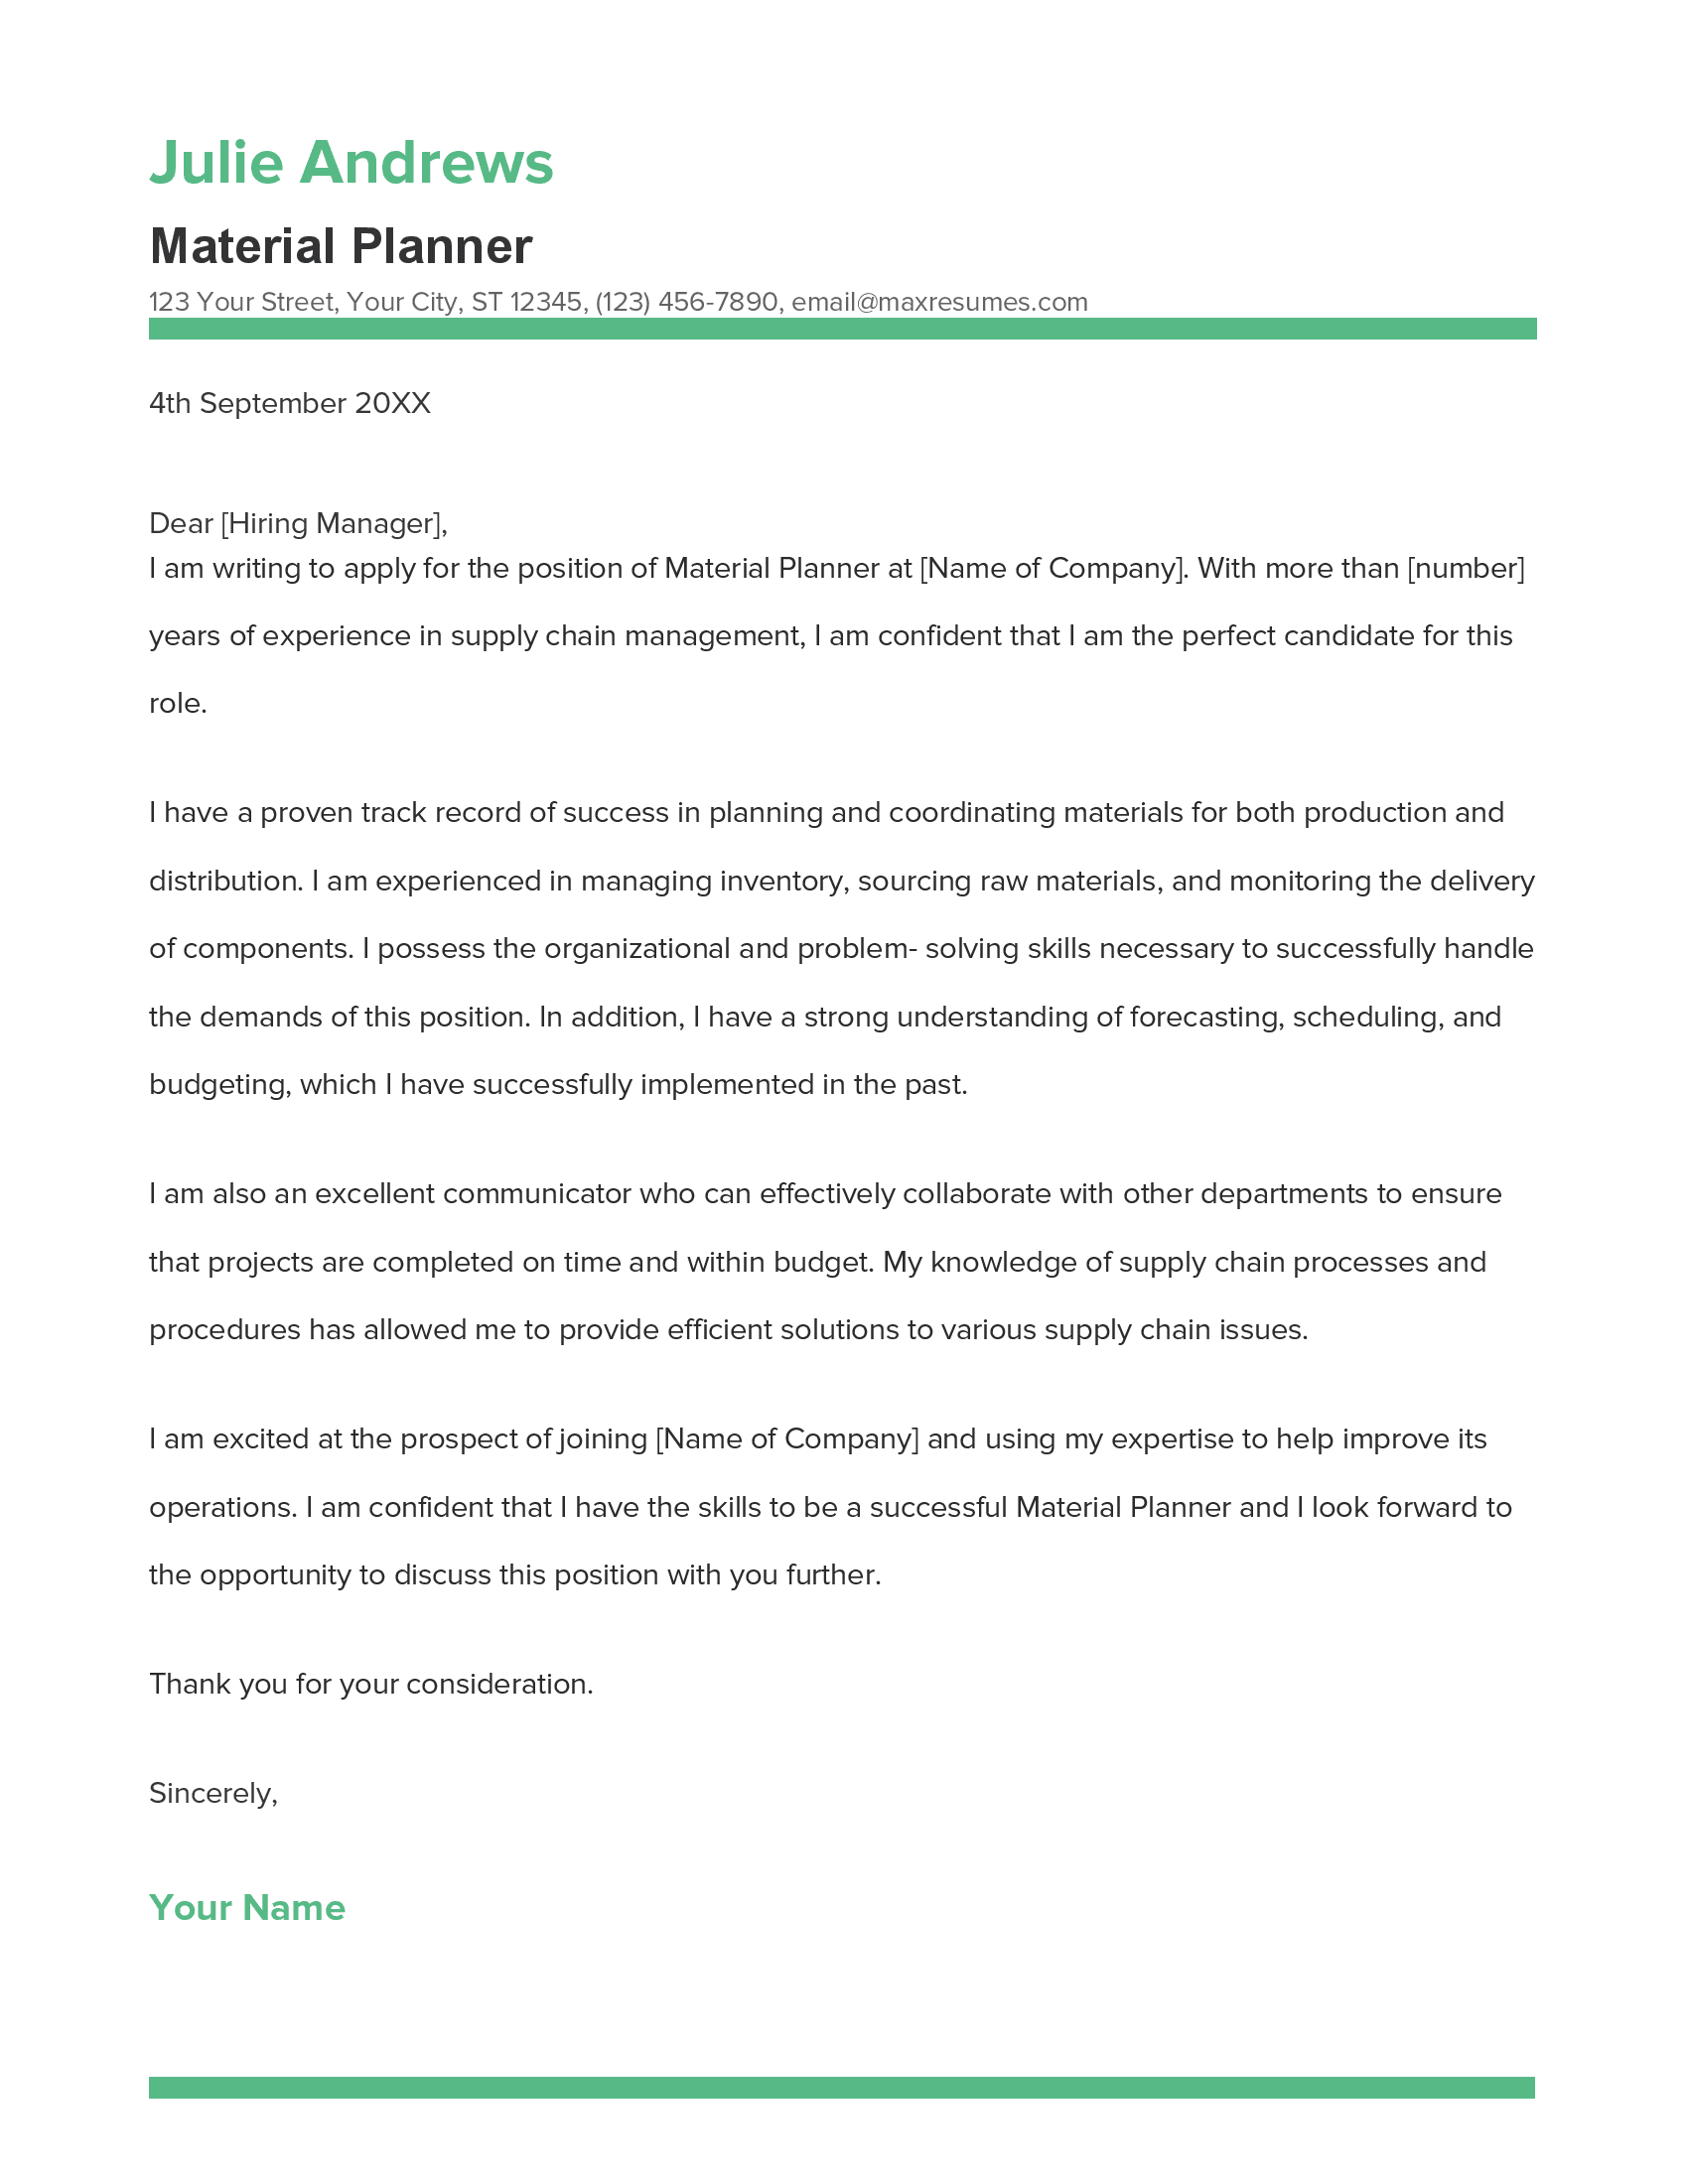 Material Planner Cover Letter Example